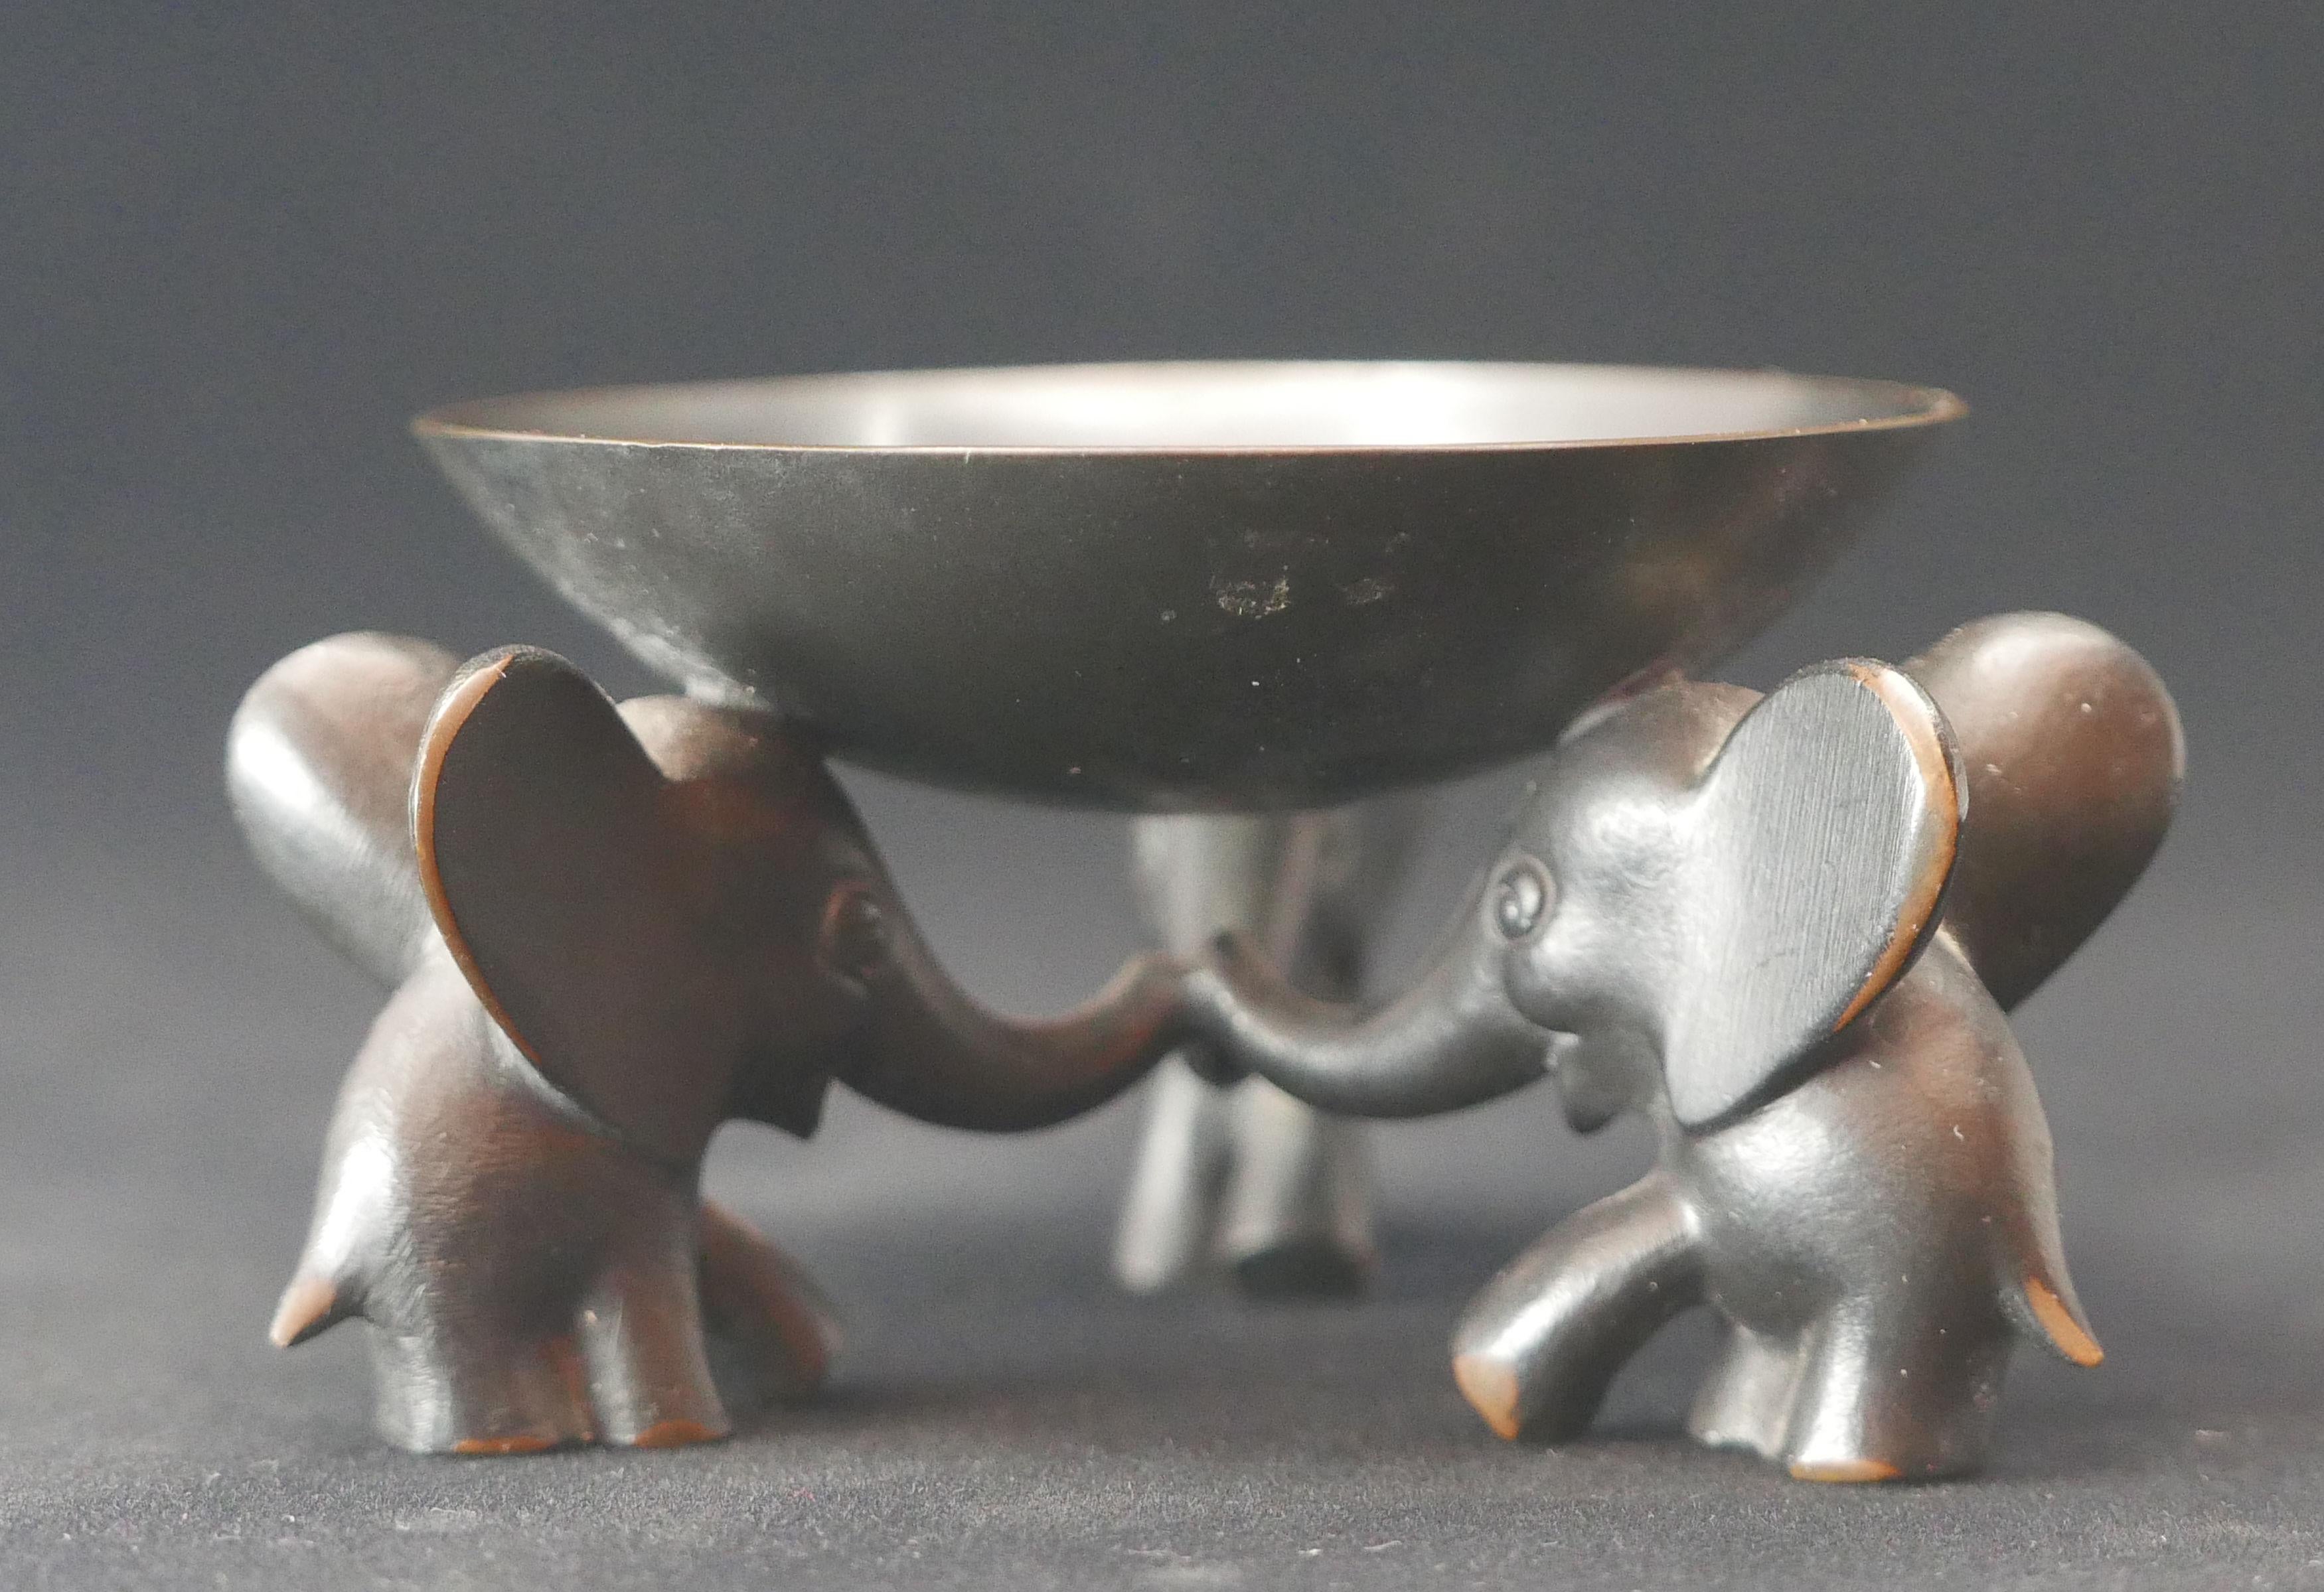 Stunning small pedestal bowl with three elephants supporting the bowl, made from blackened brass. Designed and executed by Richard Rohac in Austria in the 1950s, who worked also for WHW Hagenauer Vienna. Probably originally designed as an ashtray